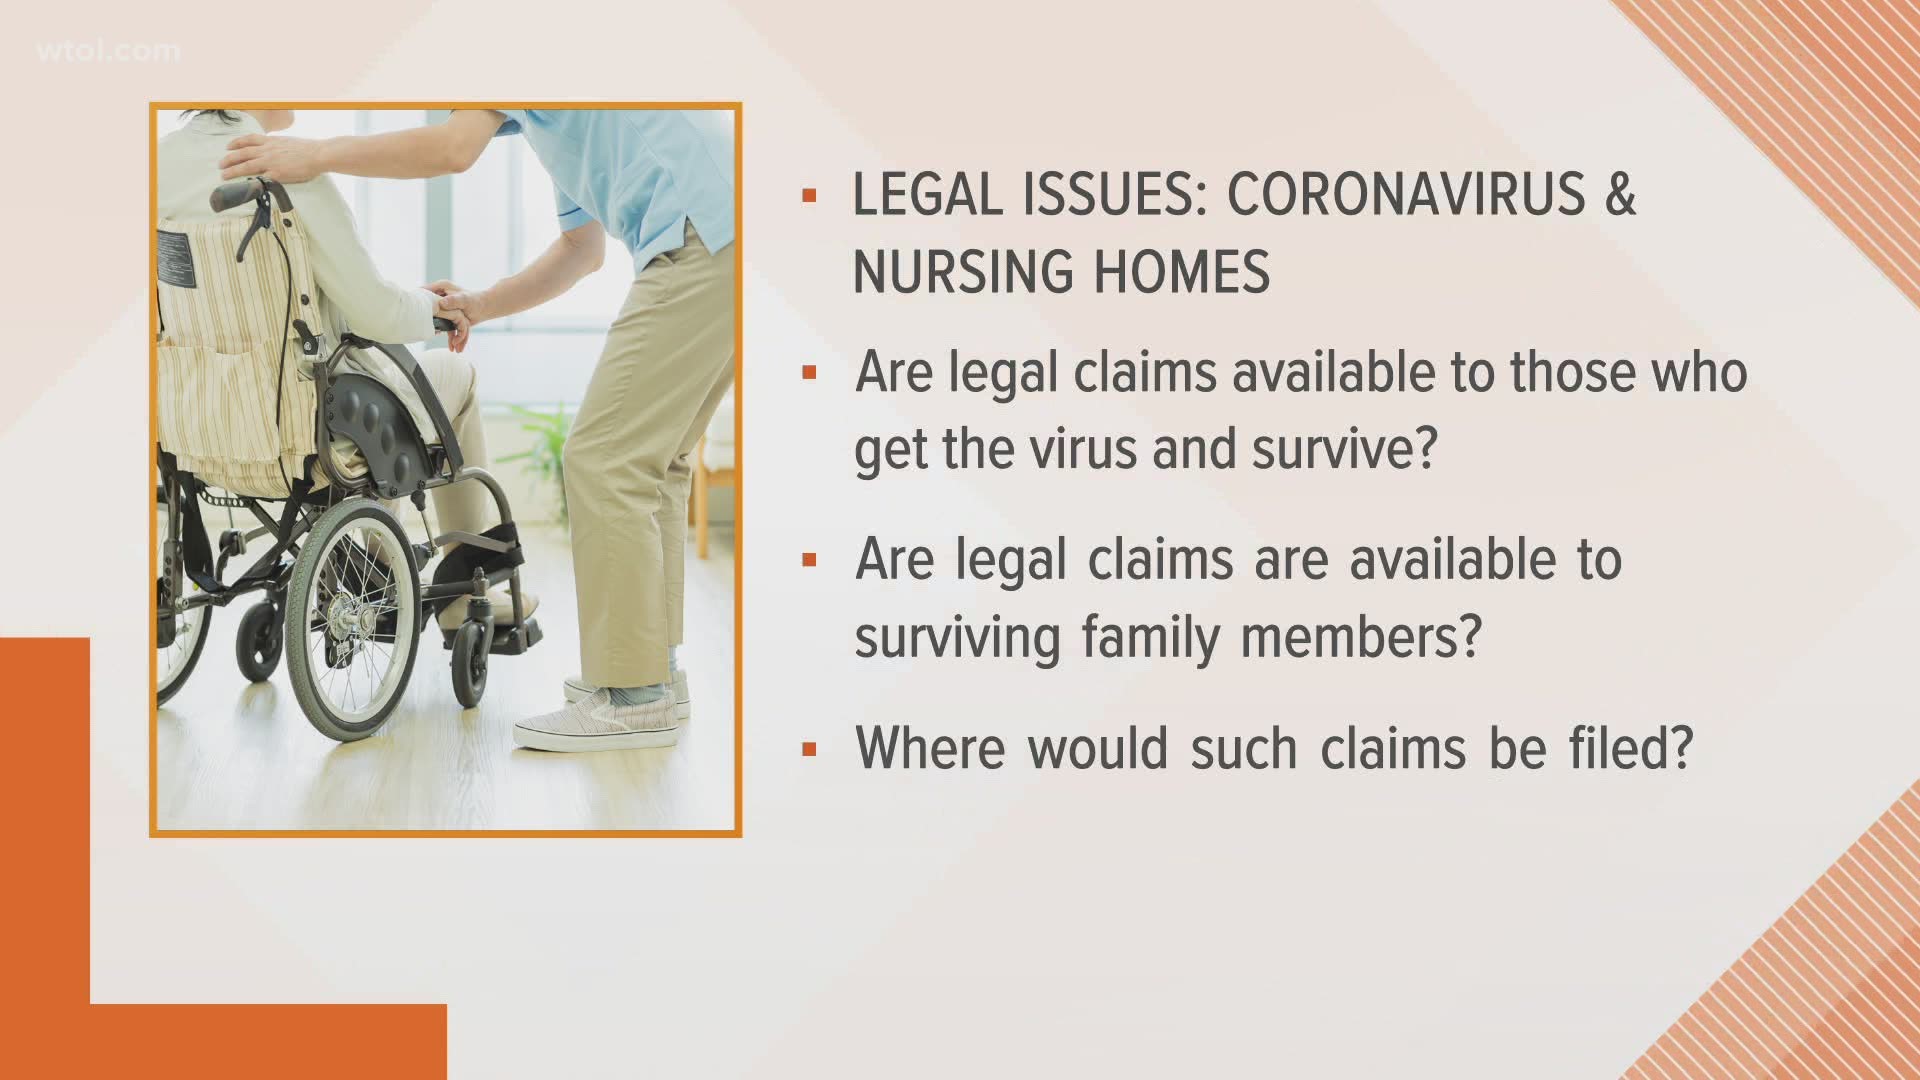 COVID-19 has made things tough on everyone, especially those who live in nursing homes and their loved ones. Charles Boyk Law tells you what legal rights you have.